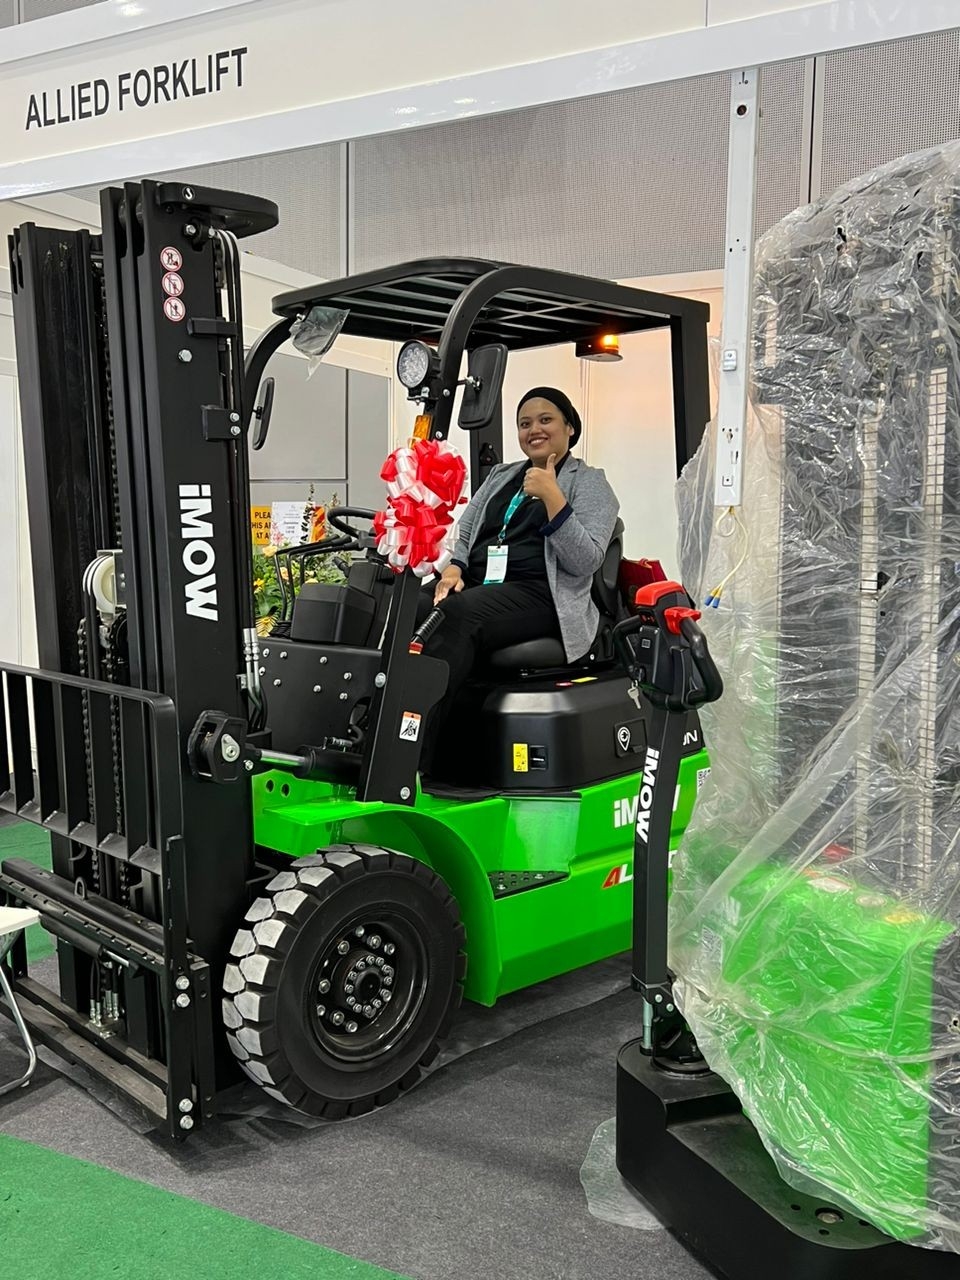 [IGEM Exhibition on 12-14 Oct 2022] Allied Forklift in supporting ESG initiative in IGEM; International Greentech & Eco Products Exhibit